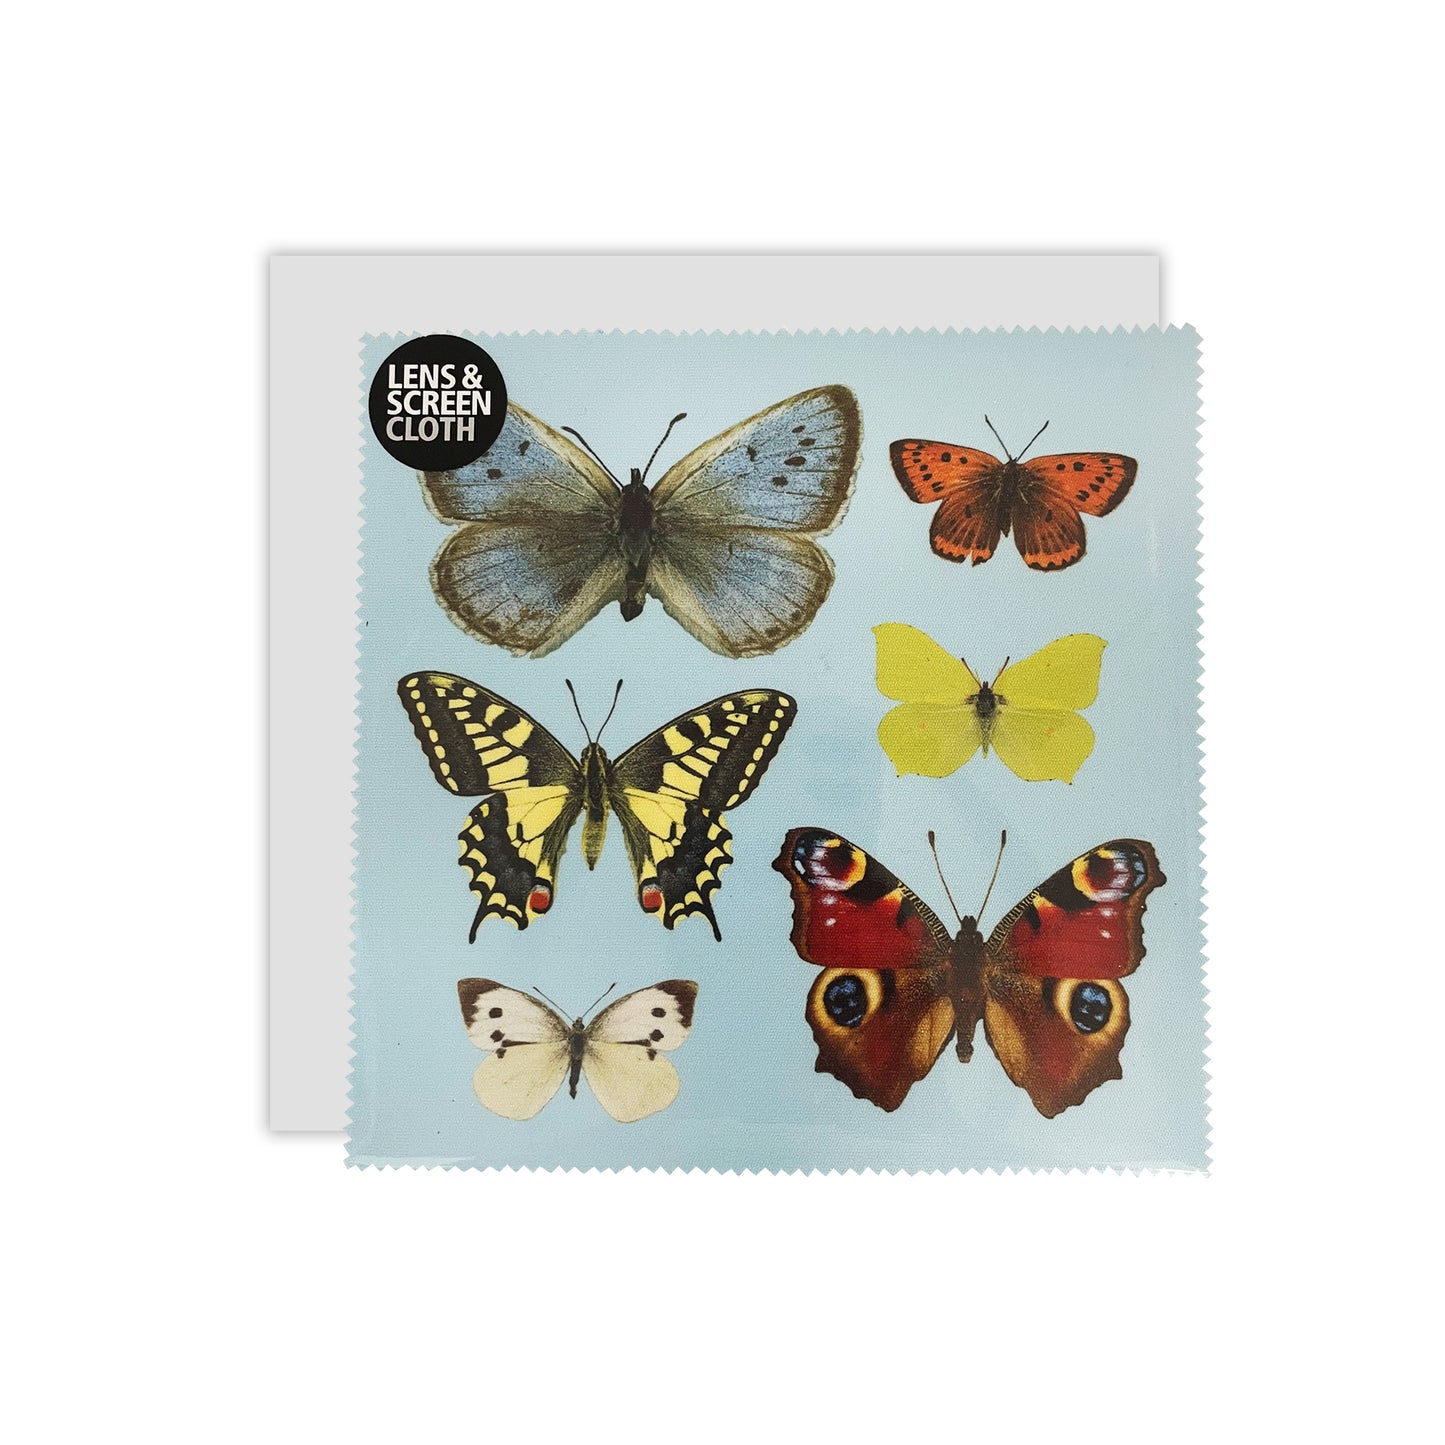 Butterflies of the United Kingdom - Lens and screen cloth